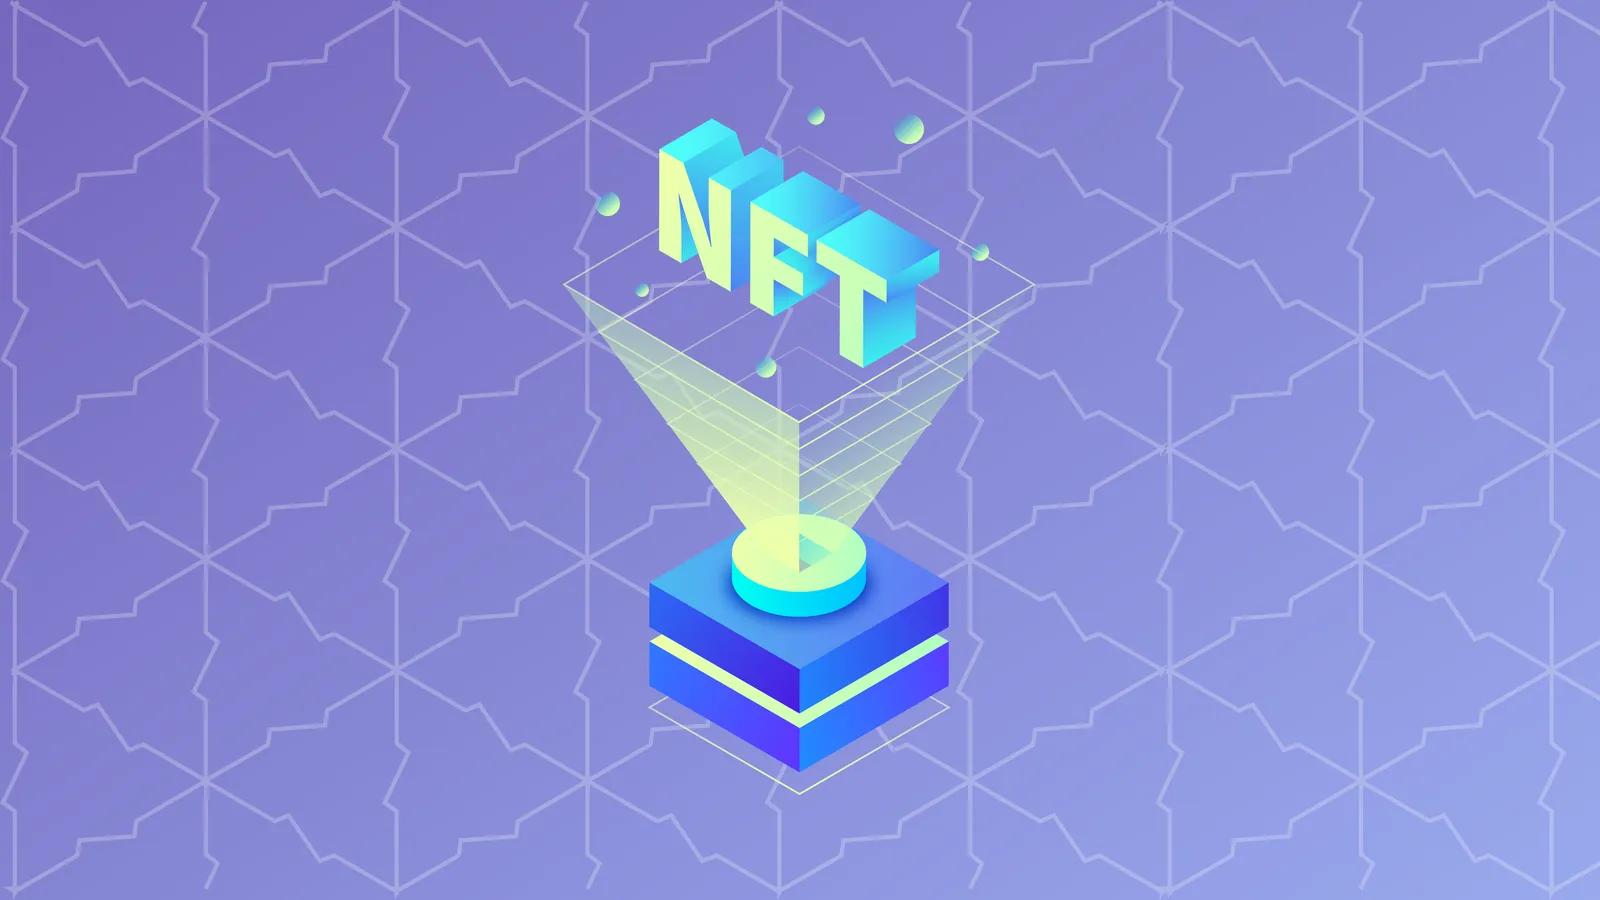 NFTs, or non-fungible tokens, are cryptographically unique digital assets. Image: Decrypt